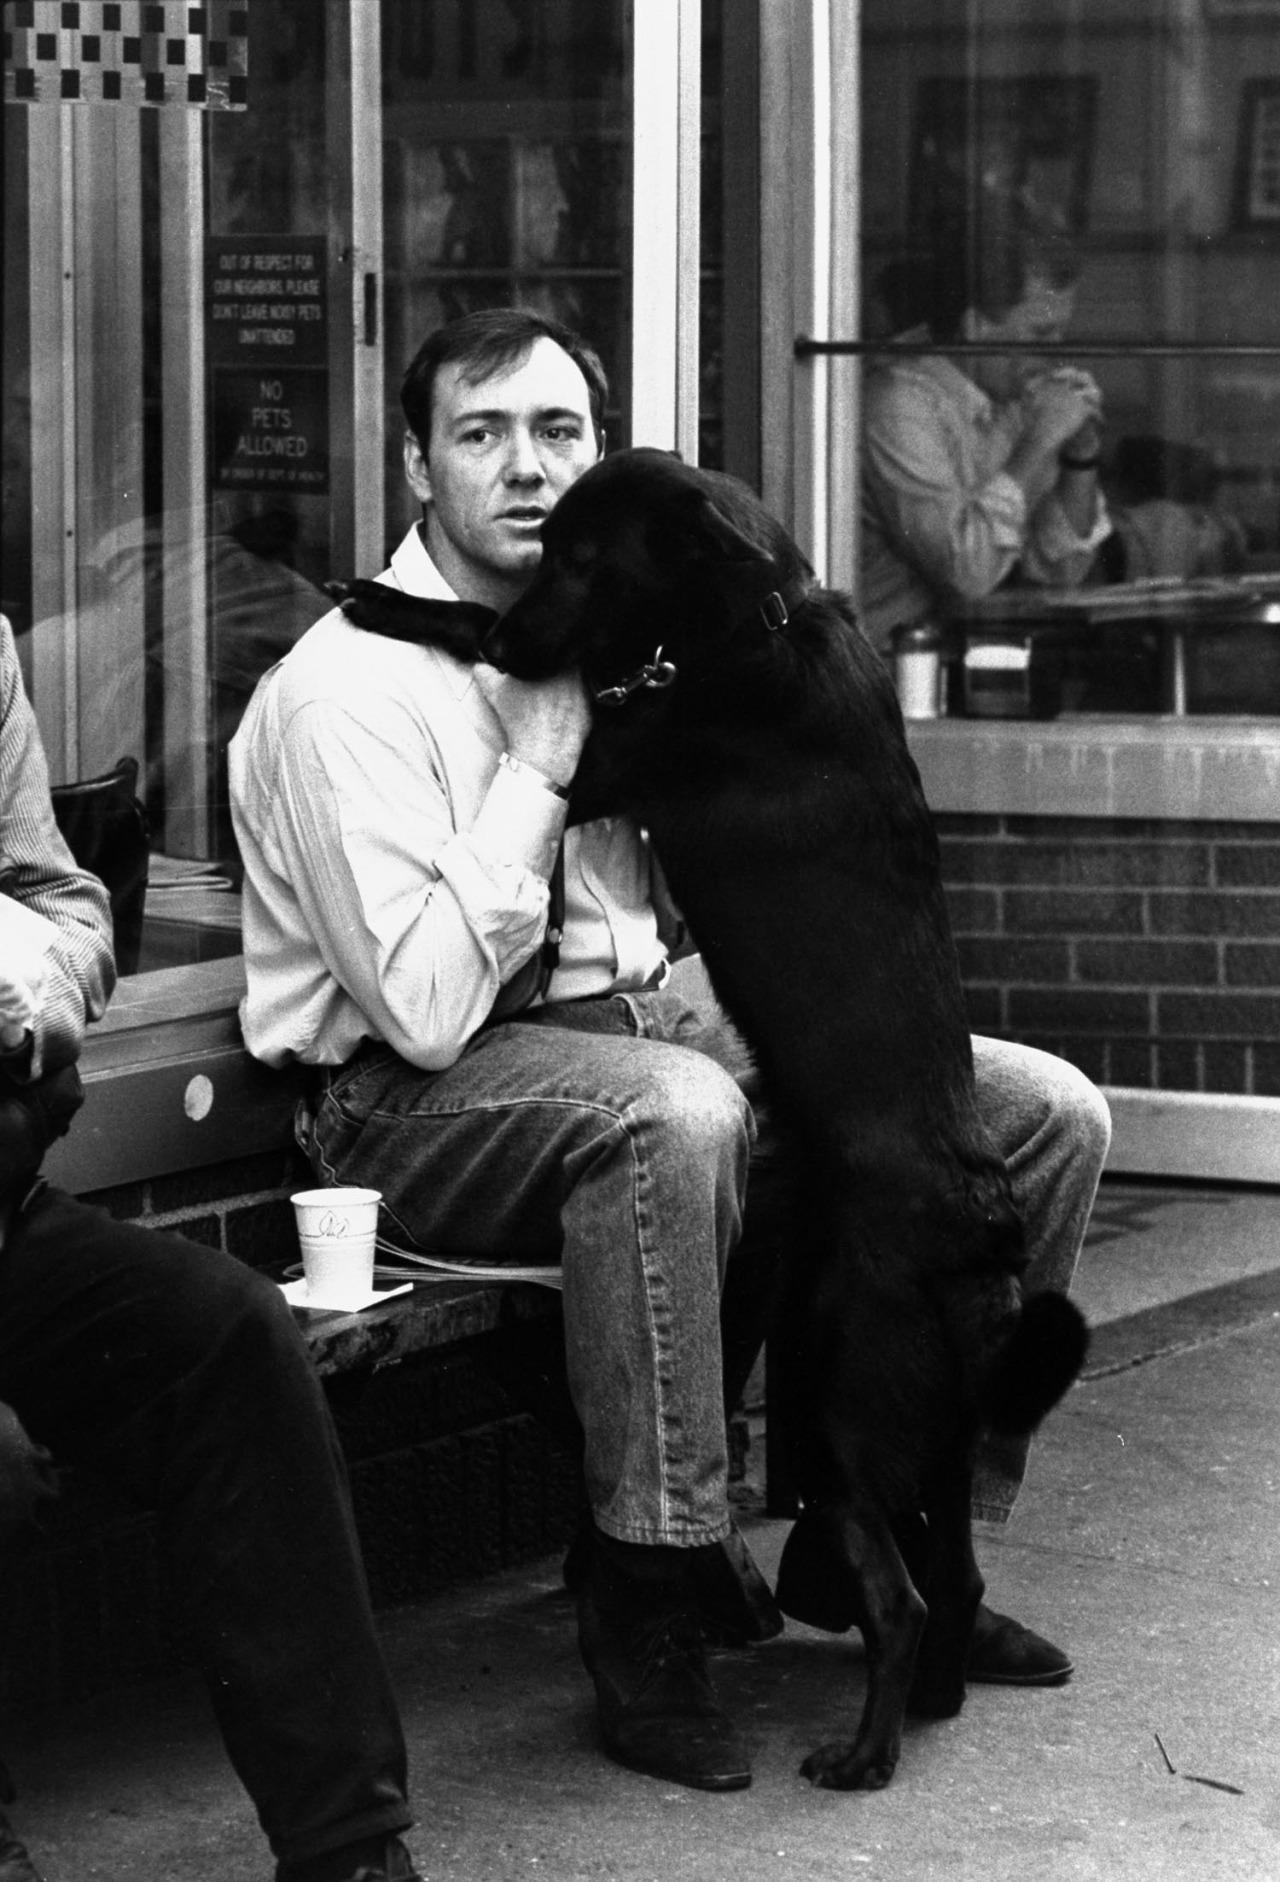 Happy 56th birthday to Kevin Spacey, great actor and dog lover. 